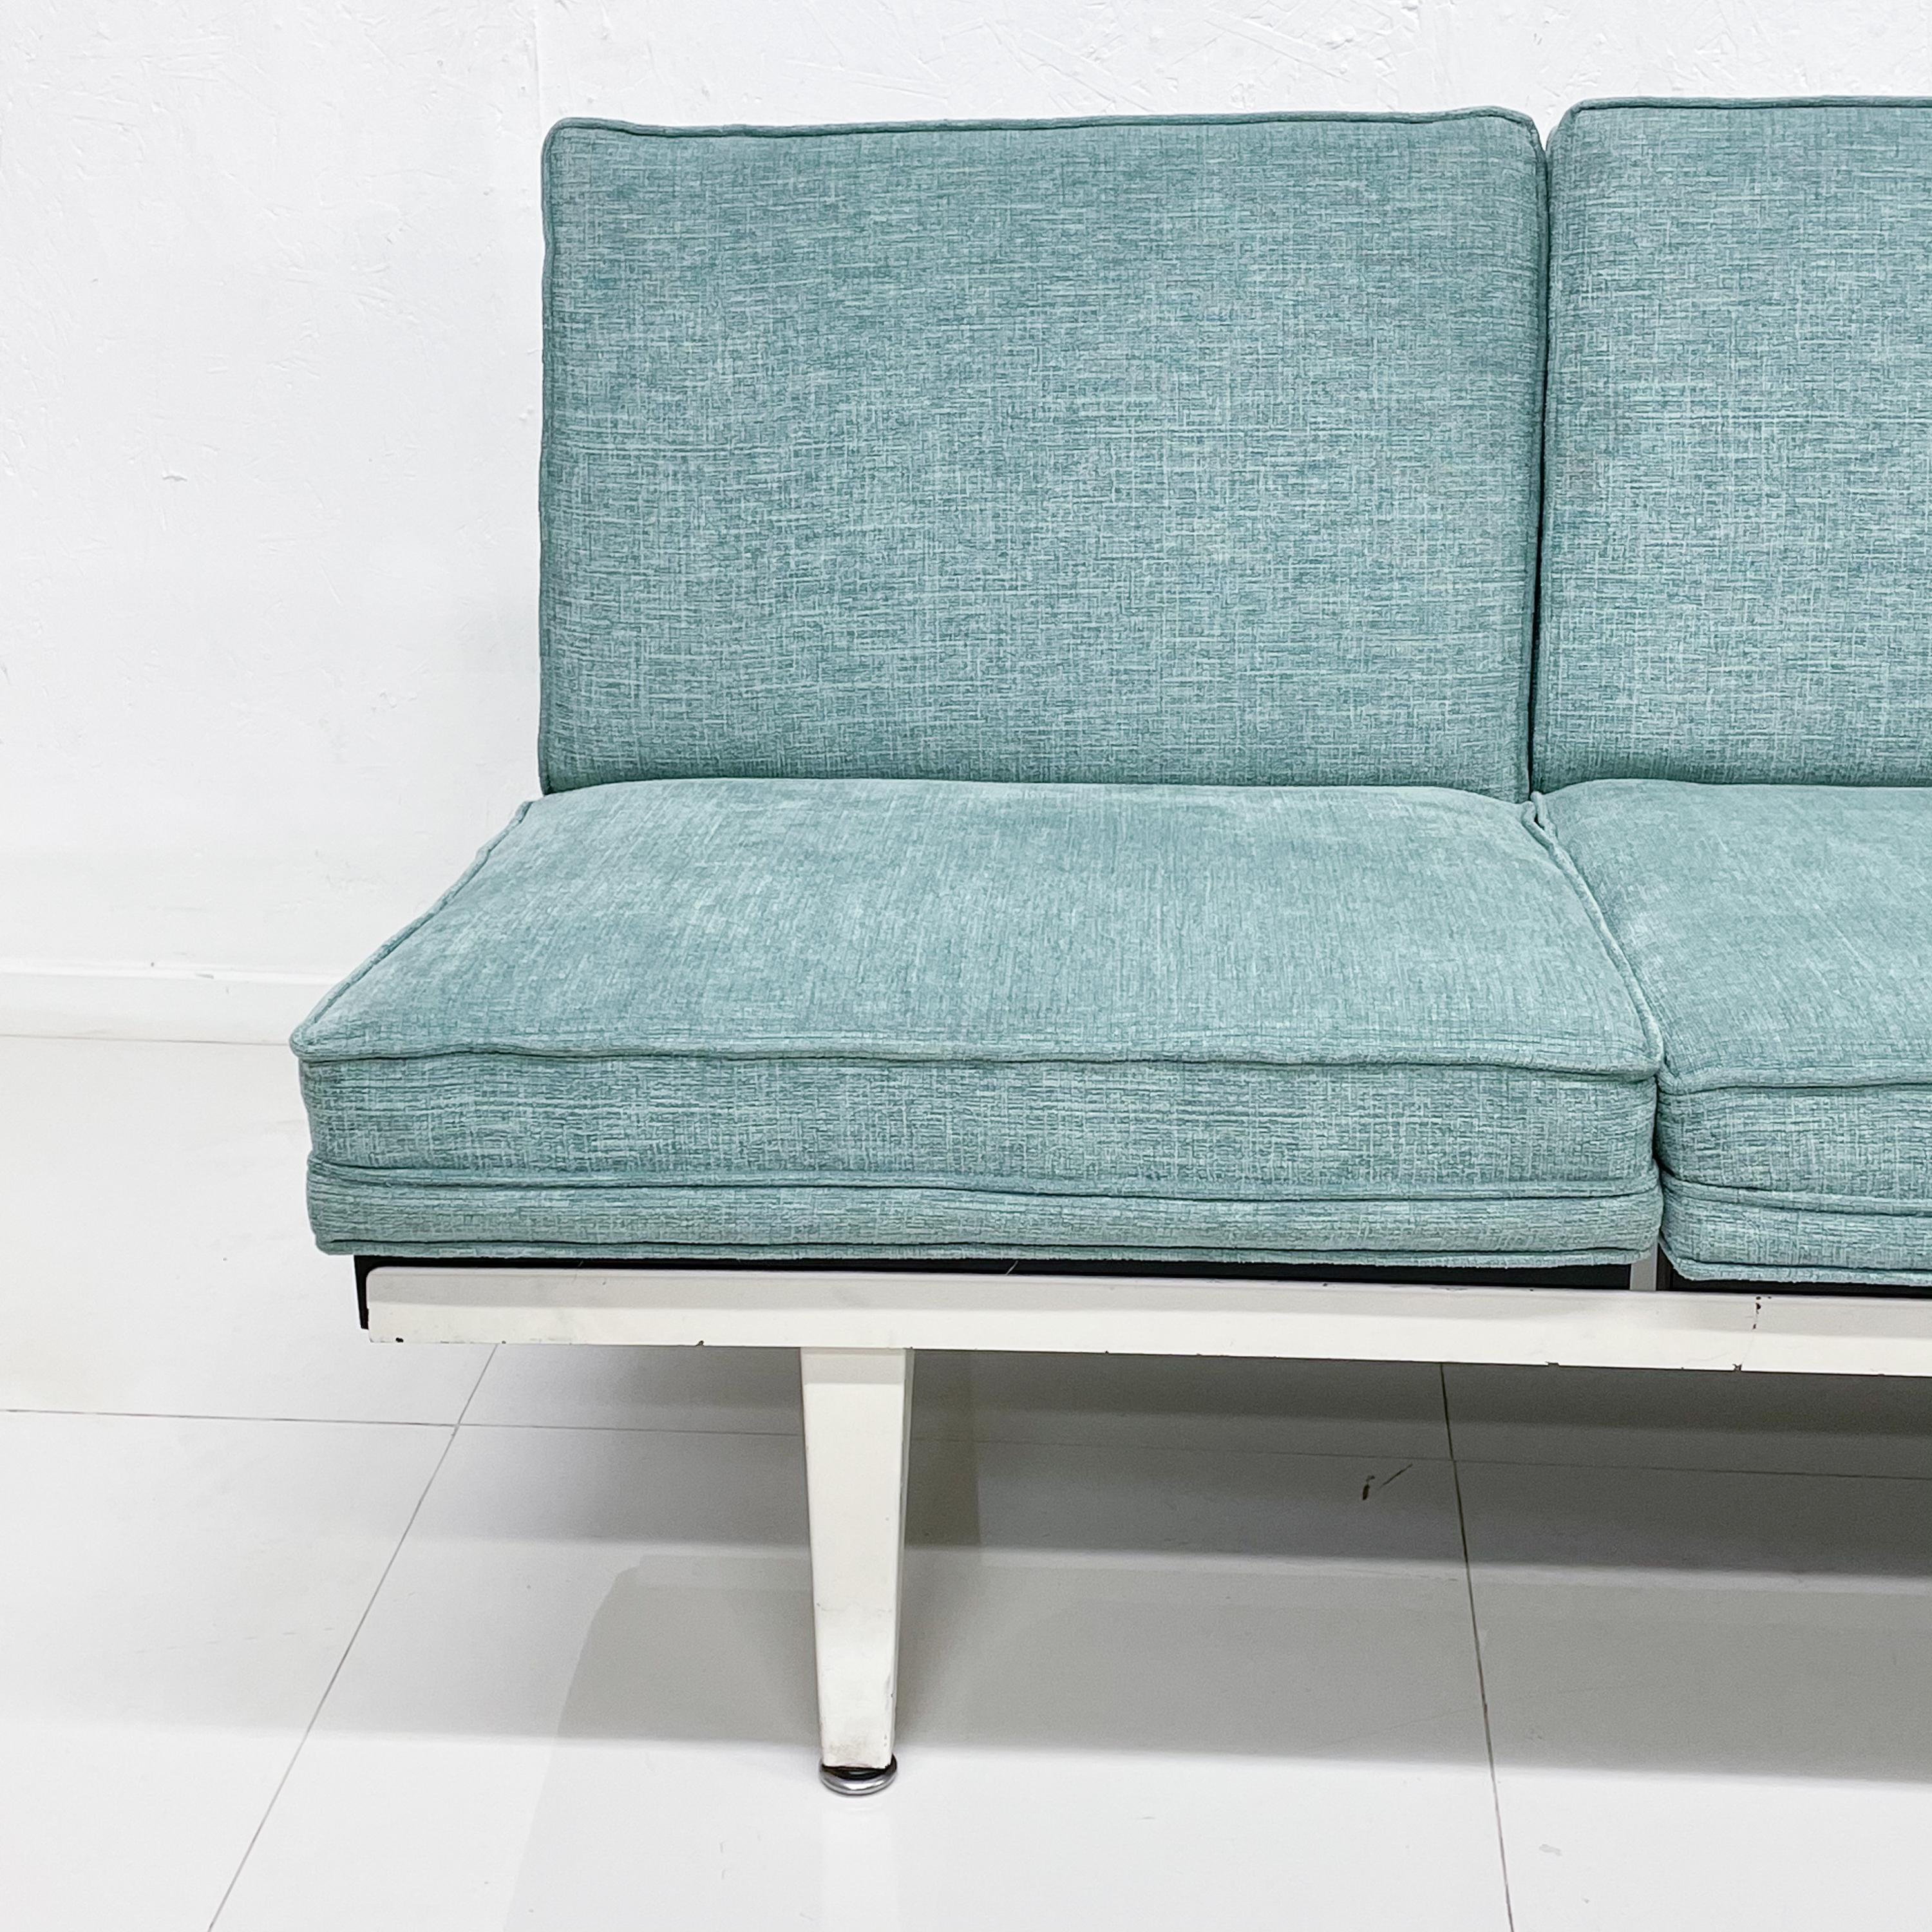 For your consideration:
George Nelson vintage sofa for Herman Miller in Ethereal Mint Green 1950s Modern USA
Fabulous angled Legs.
Made in the USA circa 1950s. 
Dimensions: 28.5 H x 72 W x 29 D, seat geight 16.75
Original vintage condition in